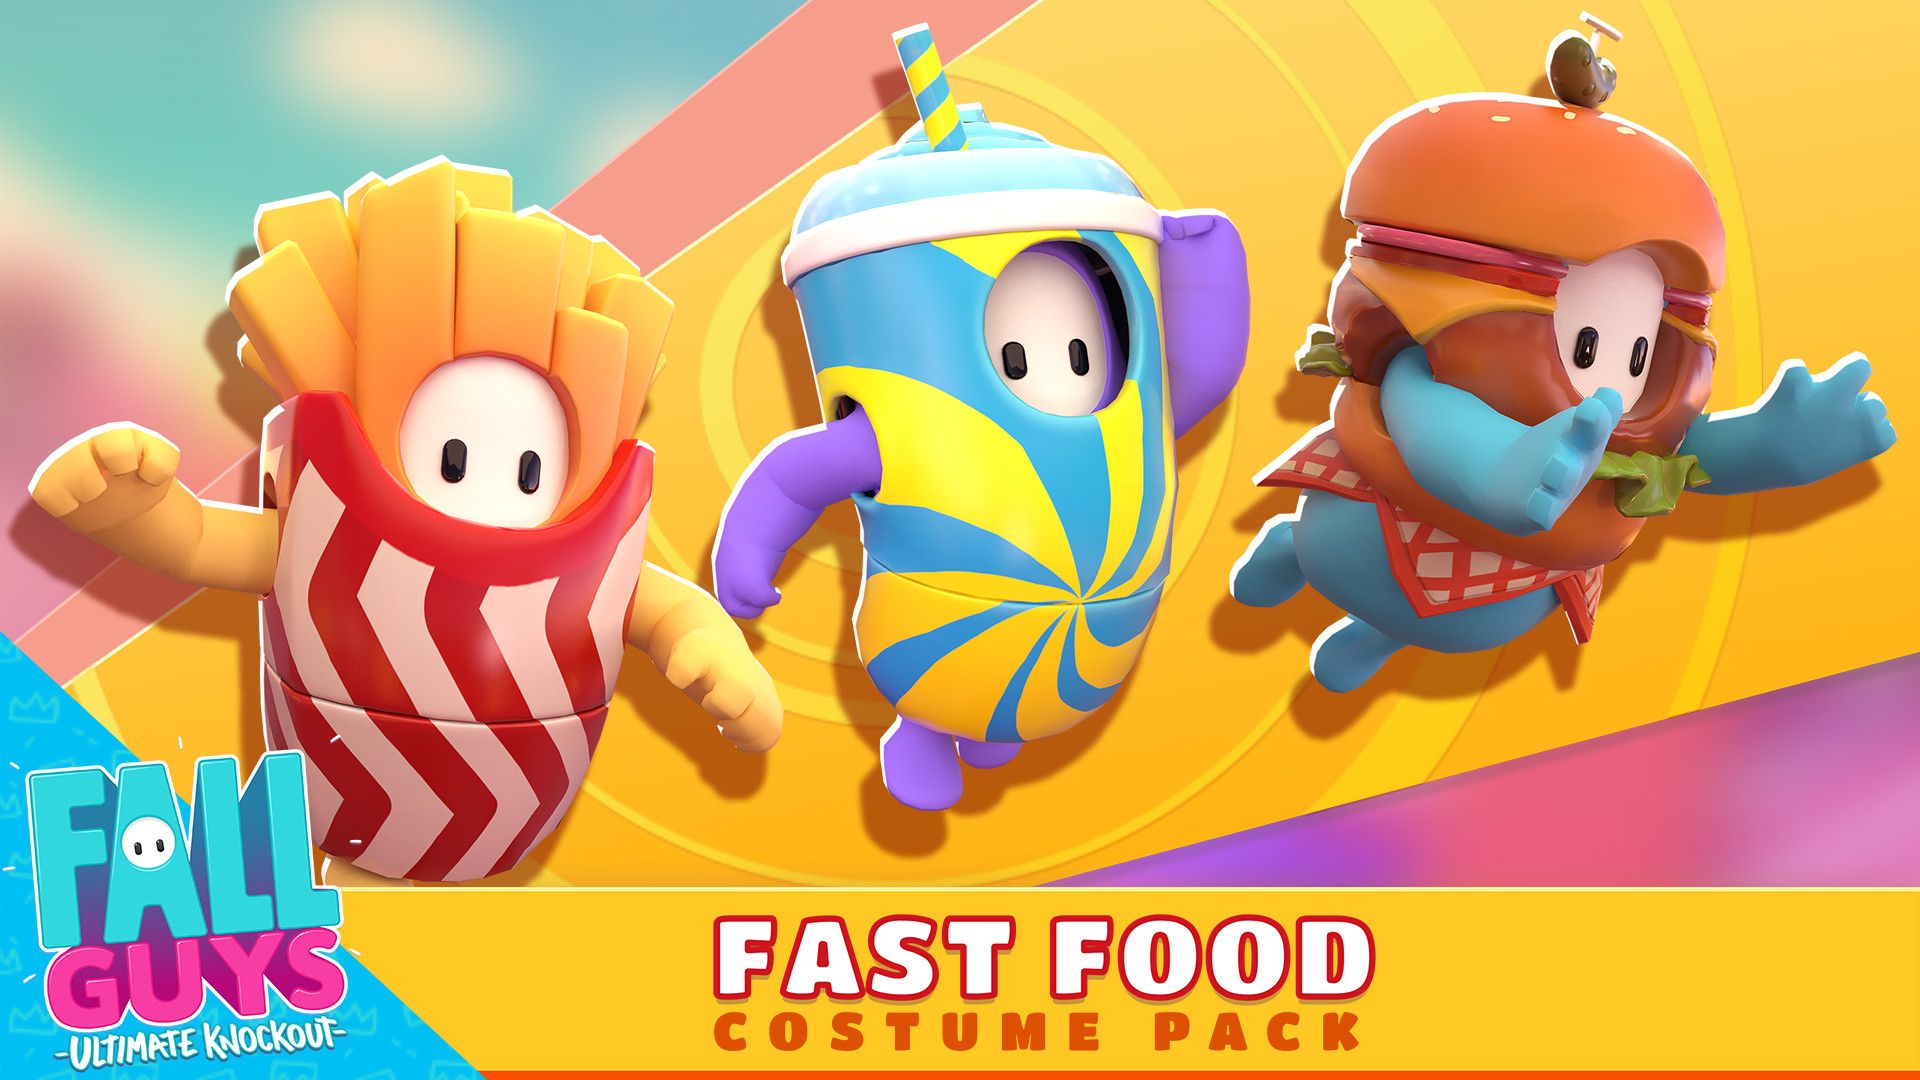 Fall Guys Food Costume Pack on Steam